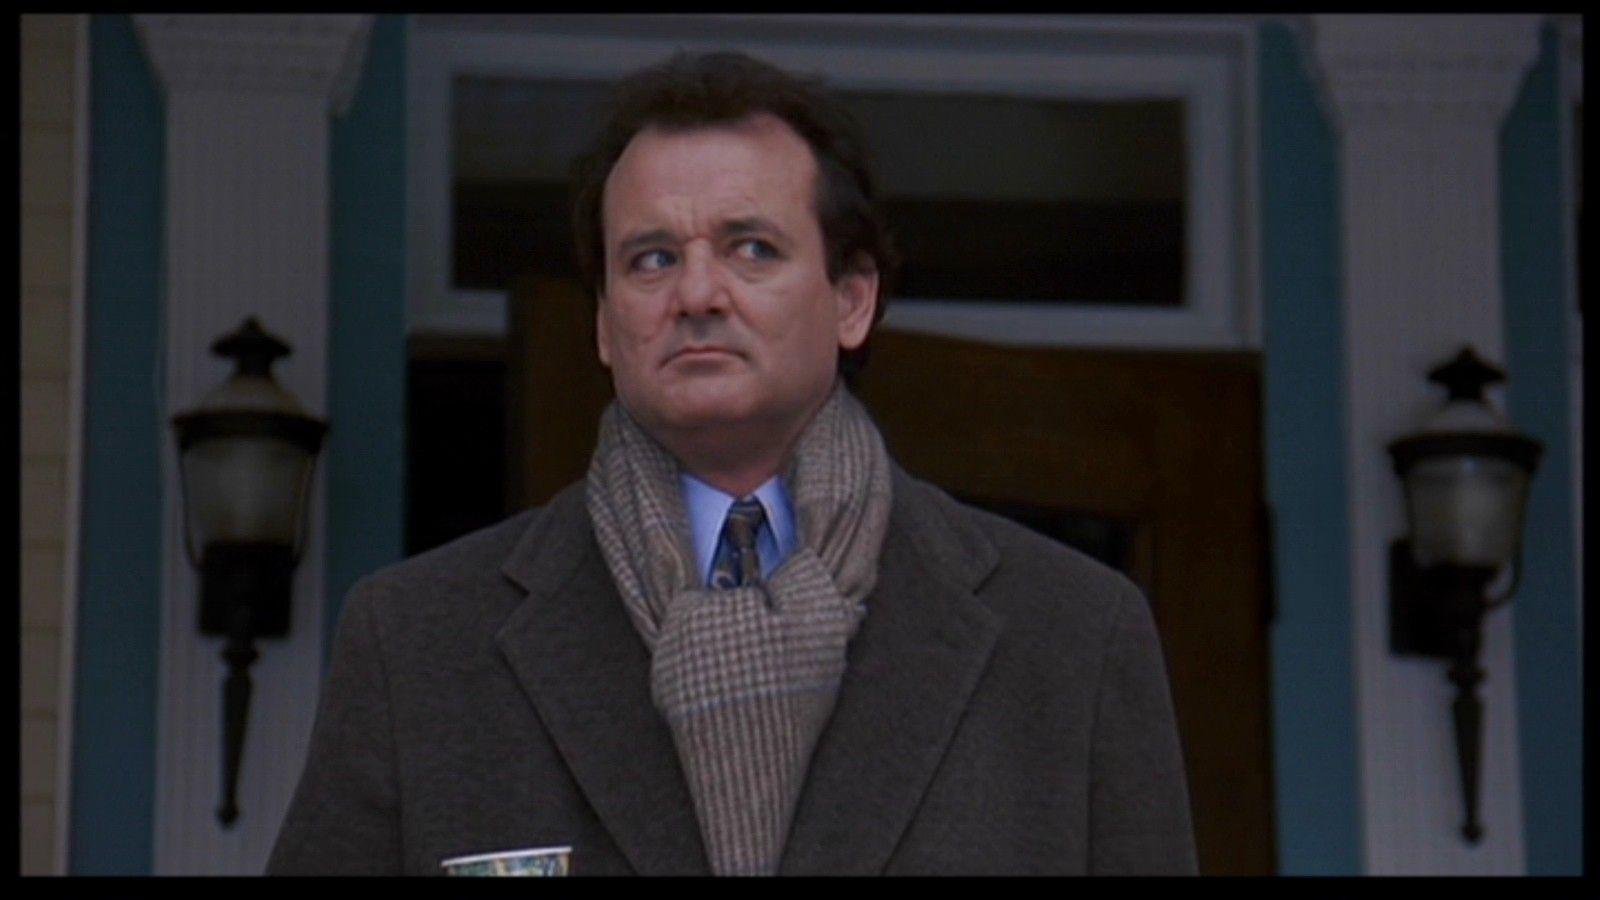 The Lessons Of 'Influencing People' And The “GROUNDHOG DAY” Movie